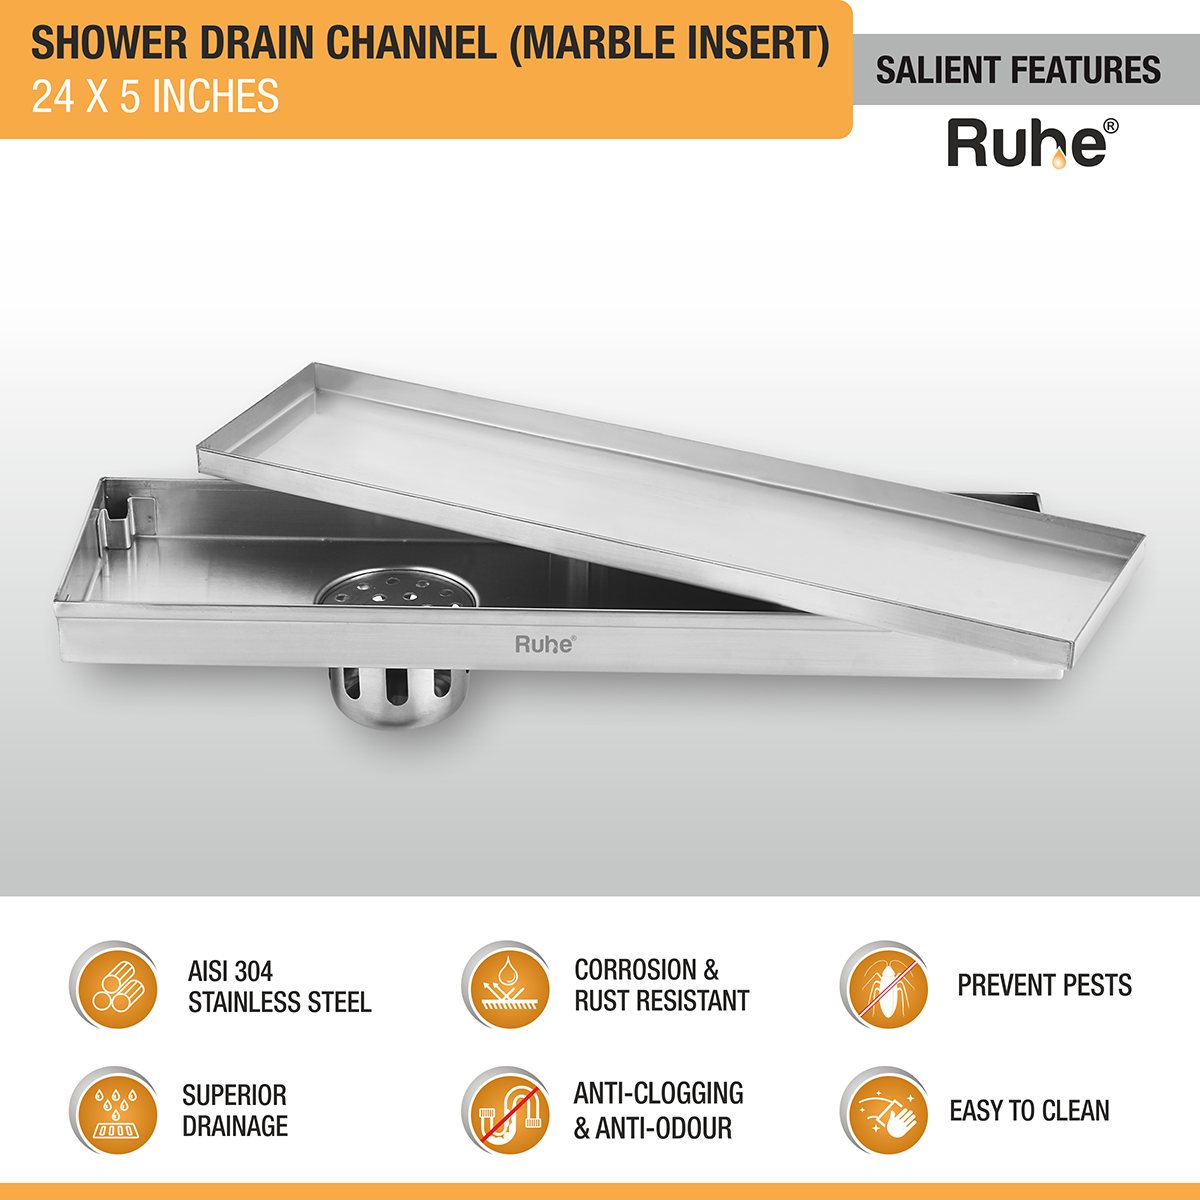 Marble Insert Shower Drain Channel (24 x 5 Inches) with Cockroach Trap (304 Grade) features